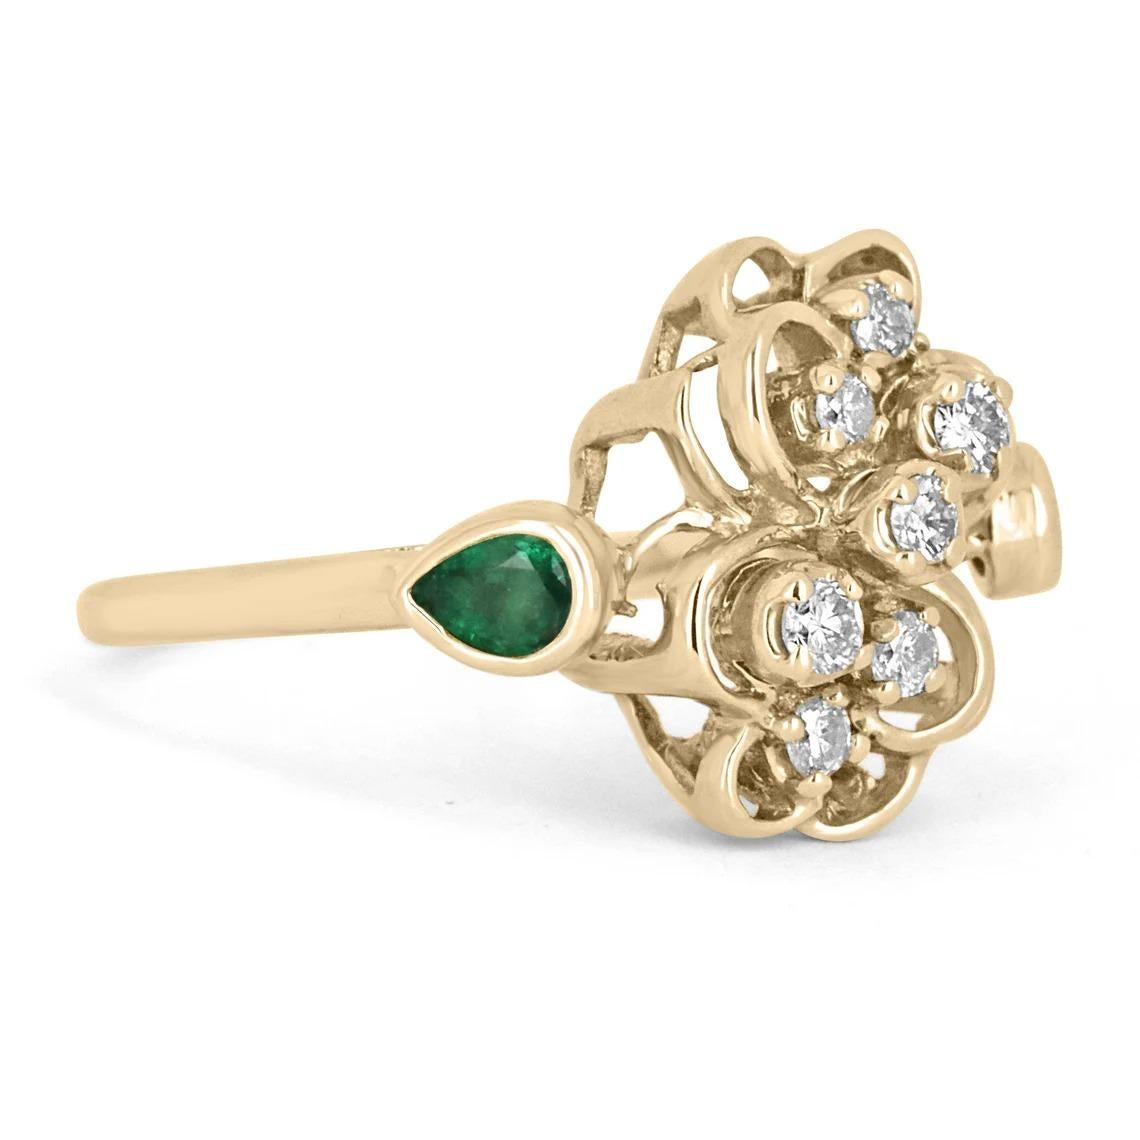 A AAA+ dark green Colombian emerald and diamond ring antique ring. Created in everlasting, 14k yellow gold the fine emerald has incredible color and ideal eye clarity. The gem is set in a secure bezel setting. This antique ring is fashionable and